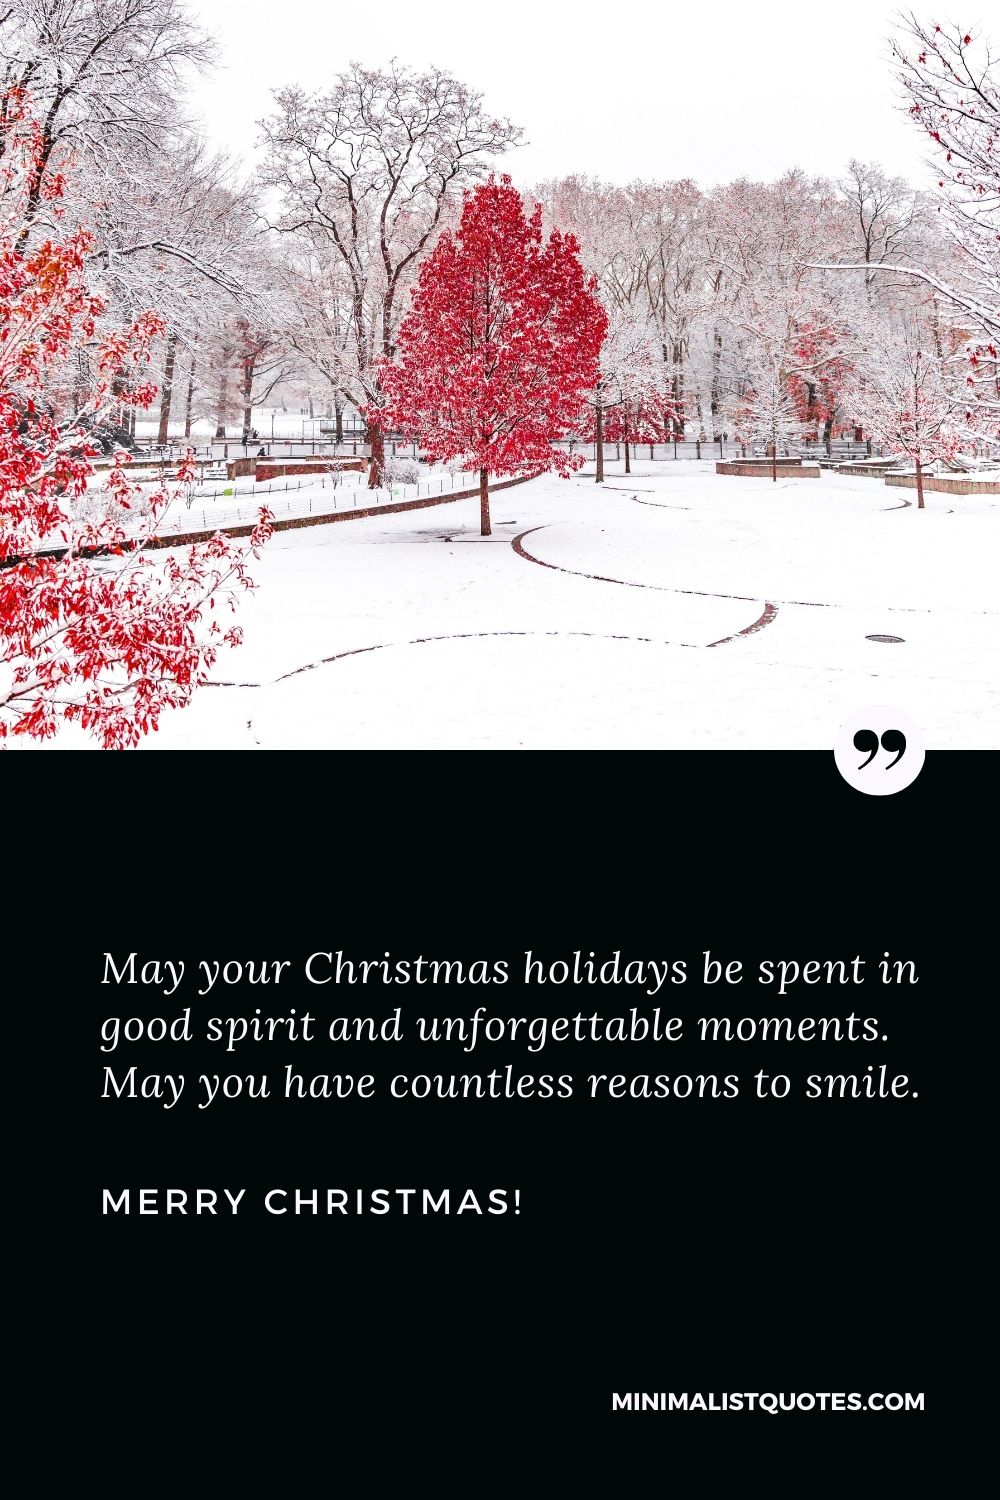 Christmas Greeting: May your Christmas holidays be spent in good spirit and unforgettable moments. May you have countless reasons to smile. Merry Christmas!